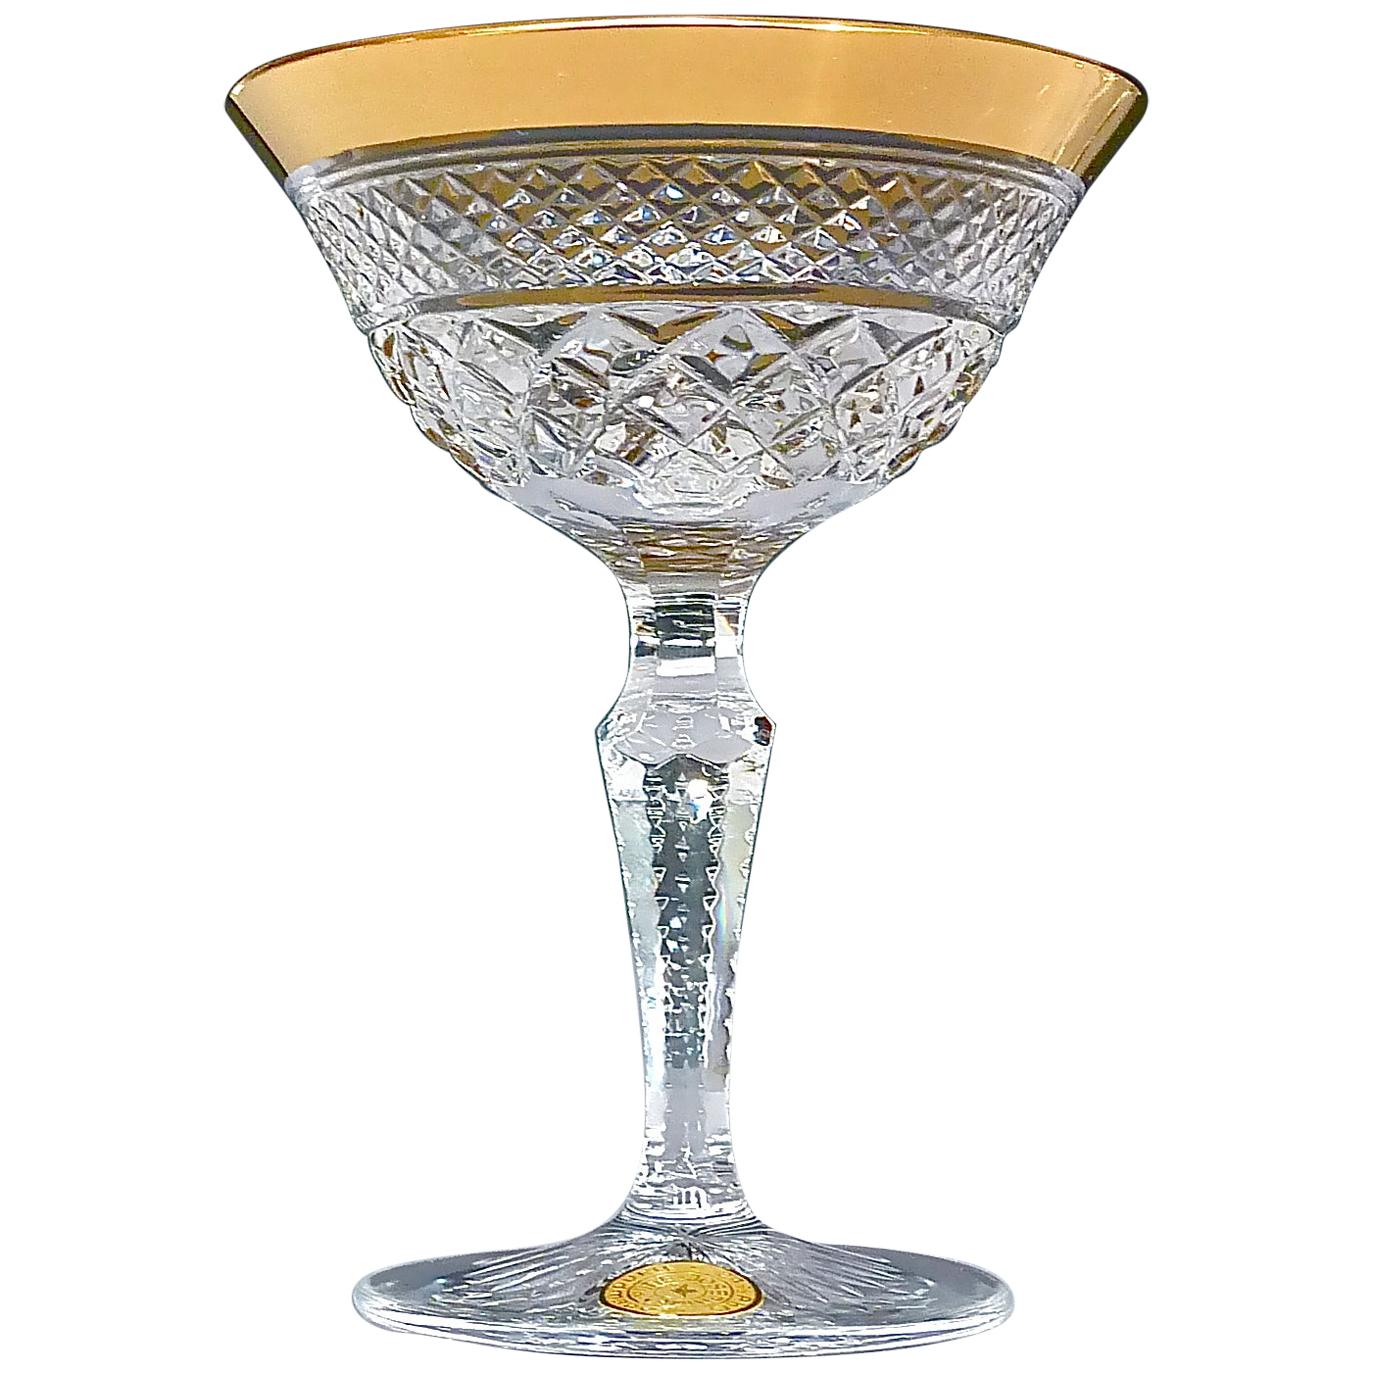 Gorgeous 20th century handcrafted faceted crystal glass set with 24-carat gold rim made by Josephinenhütte Moser circa 1960-1970 and very in the style of the exclusive French company Baccarat or Saint Louis thistle. This exquisite set of 6 liqueur